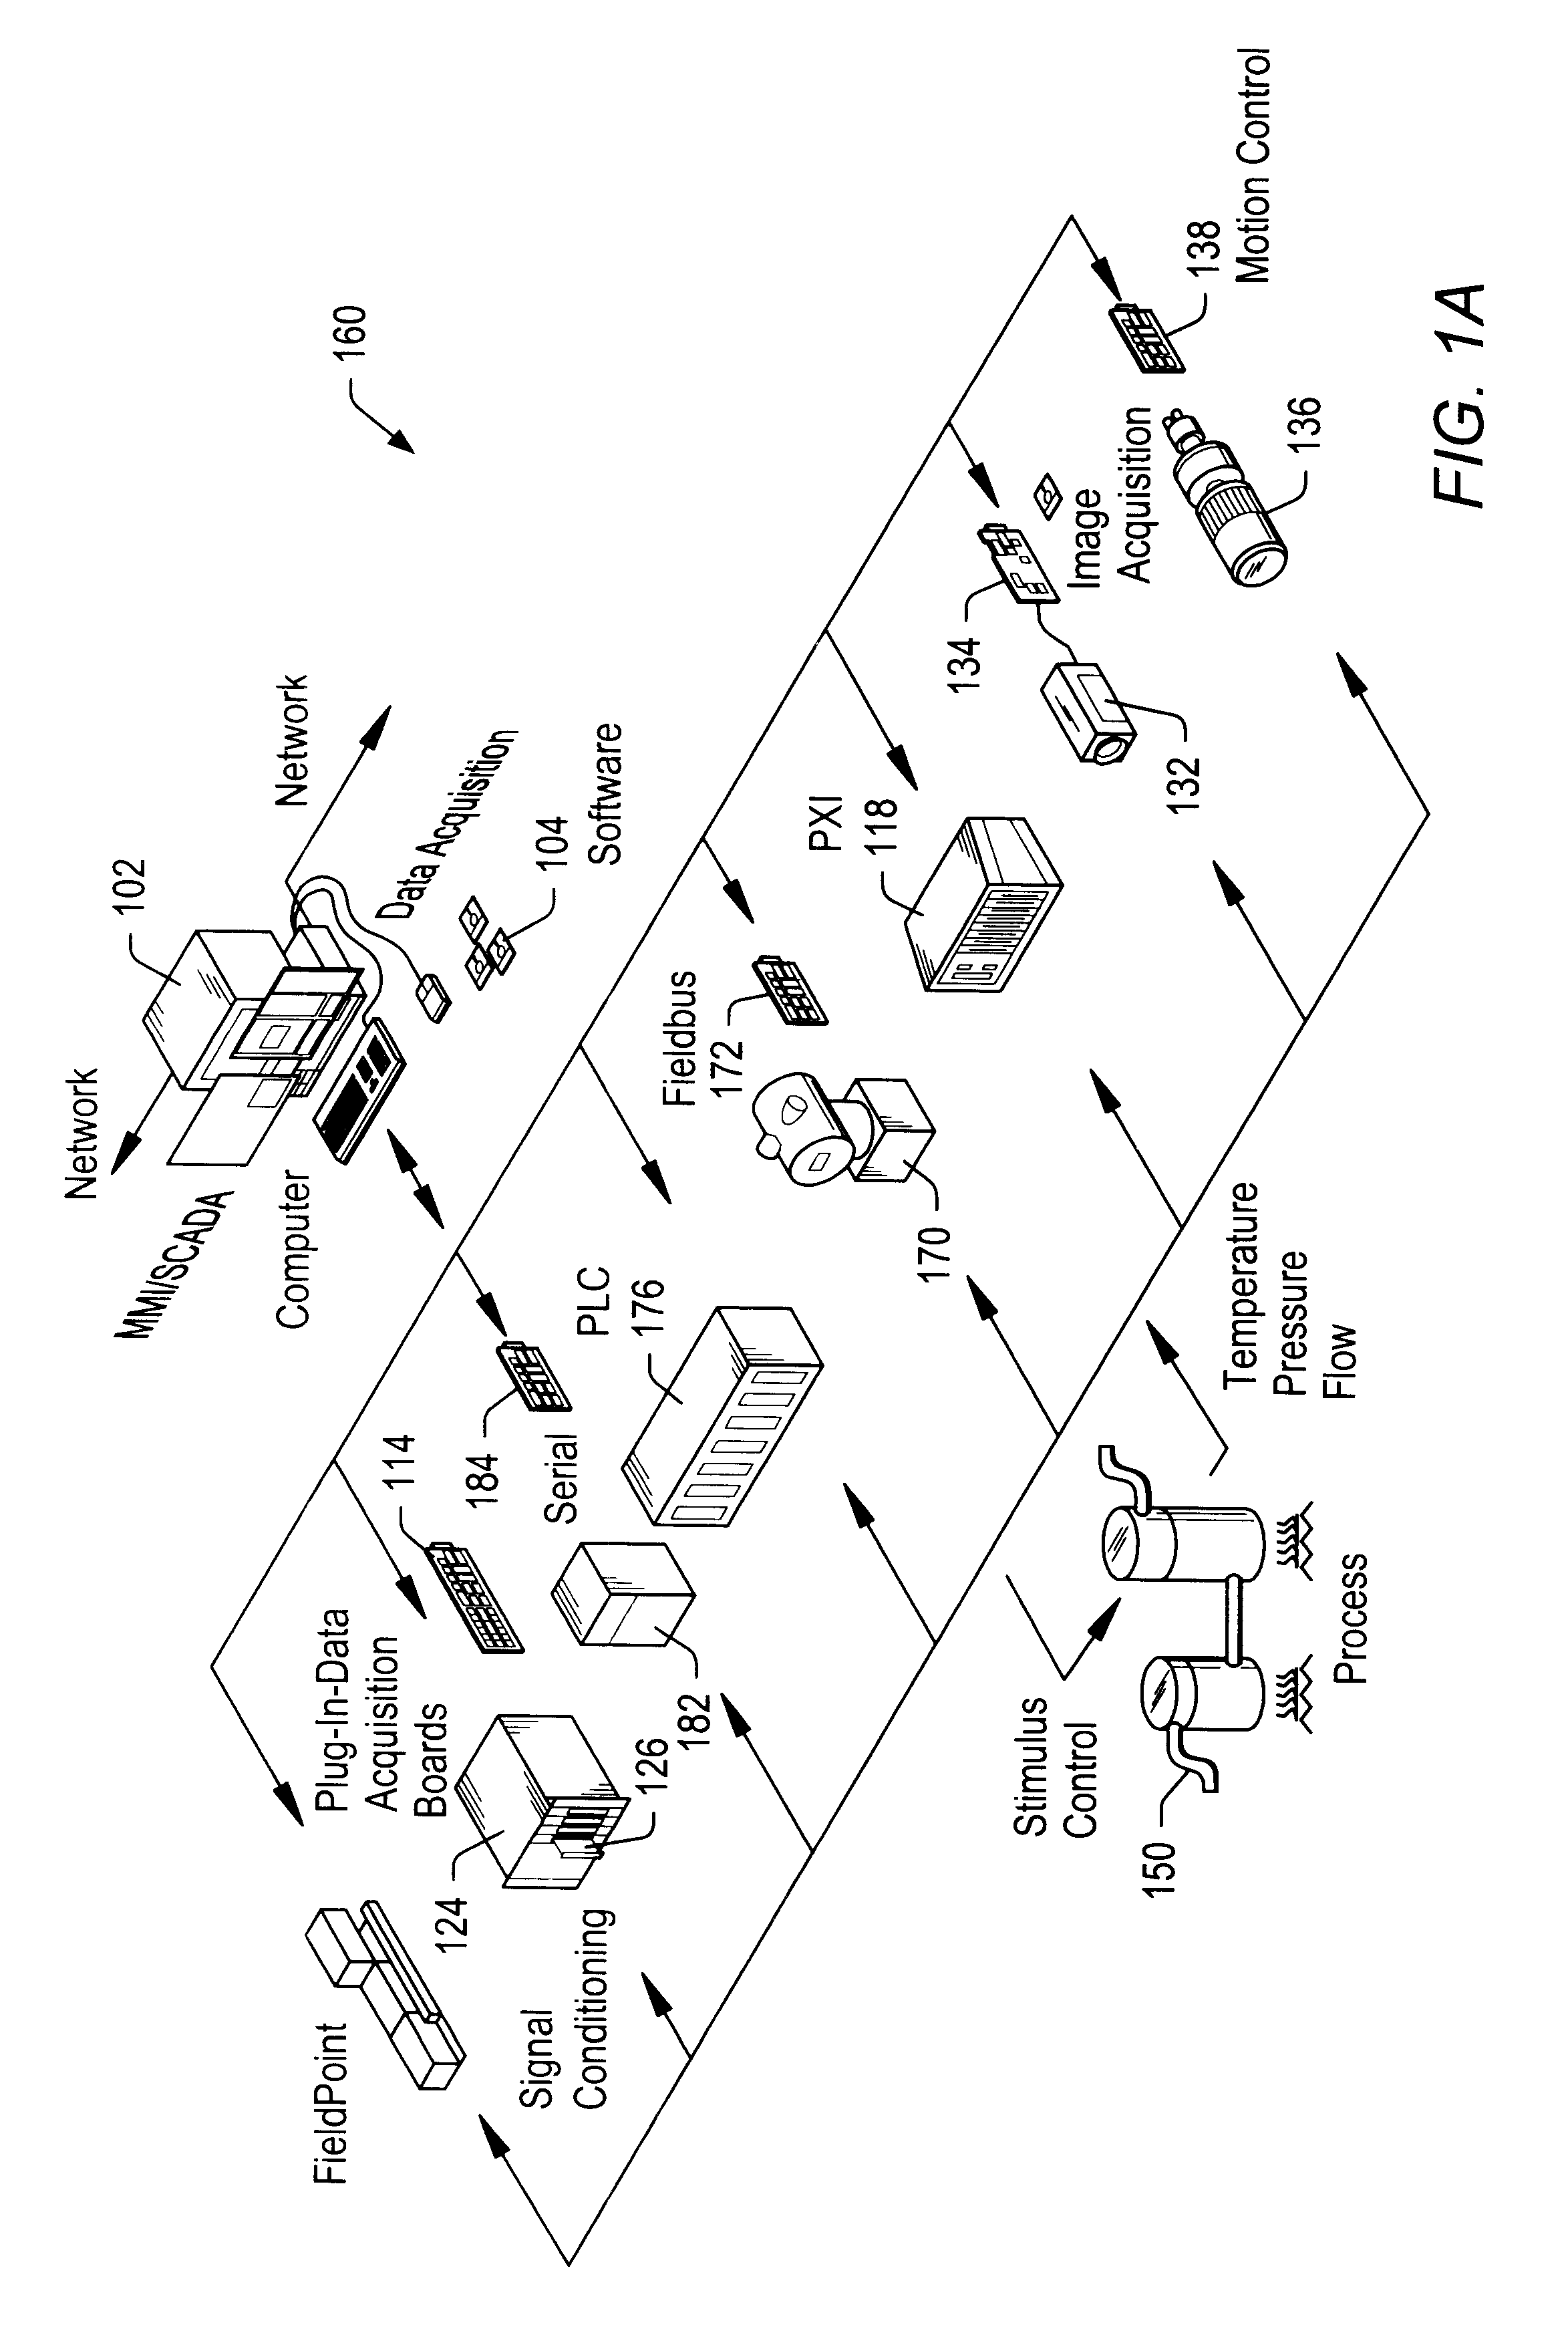 System and method for accessing object capabilities in a graphical program